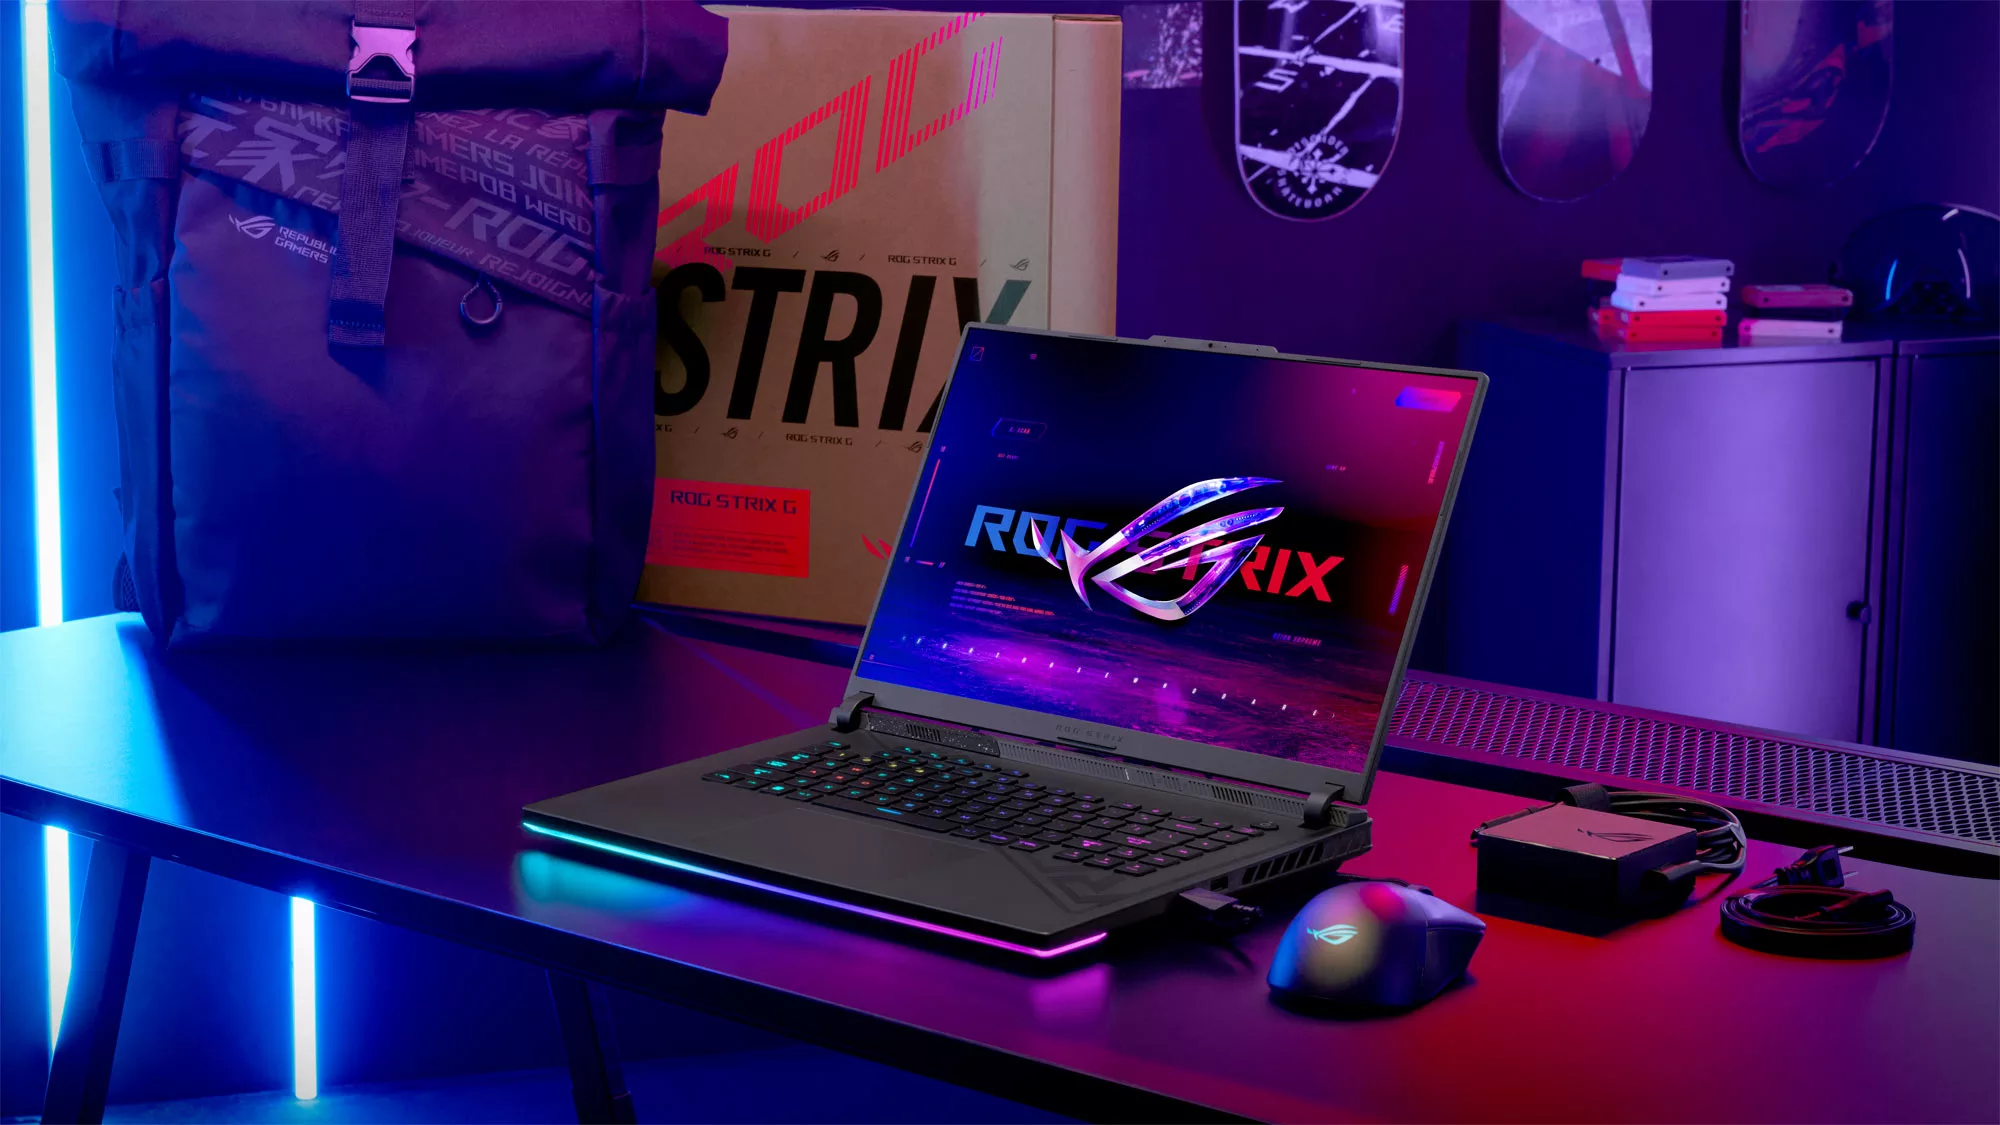 The ROG Strix G16 on a desk next to a backpack and box with the Strix label visible.